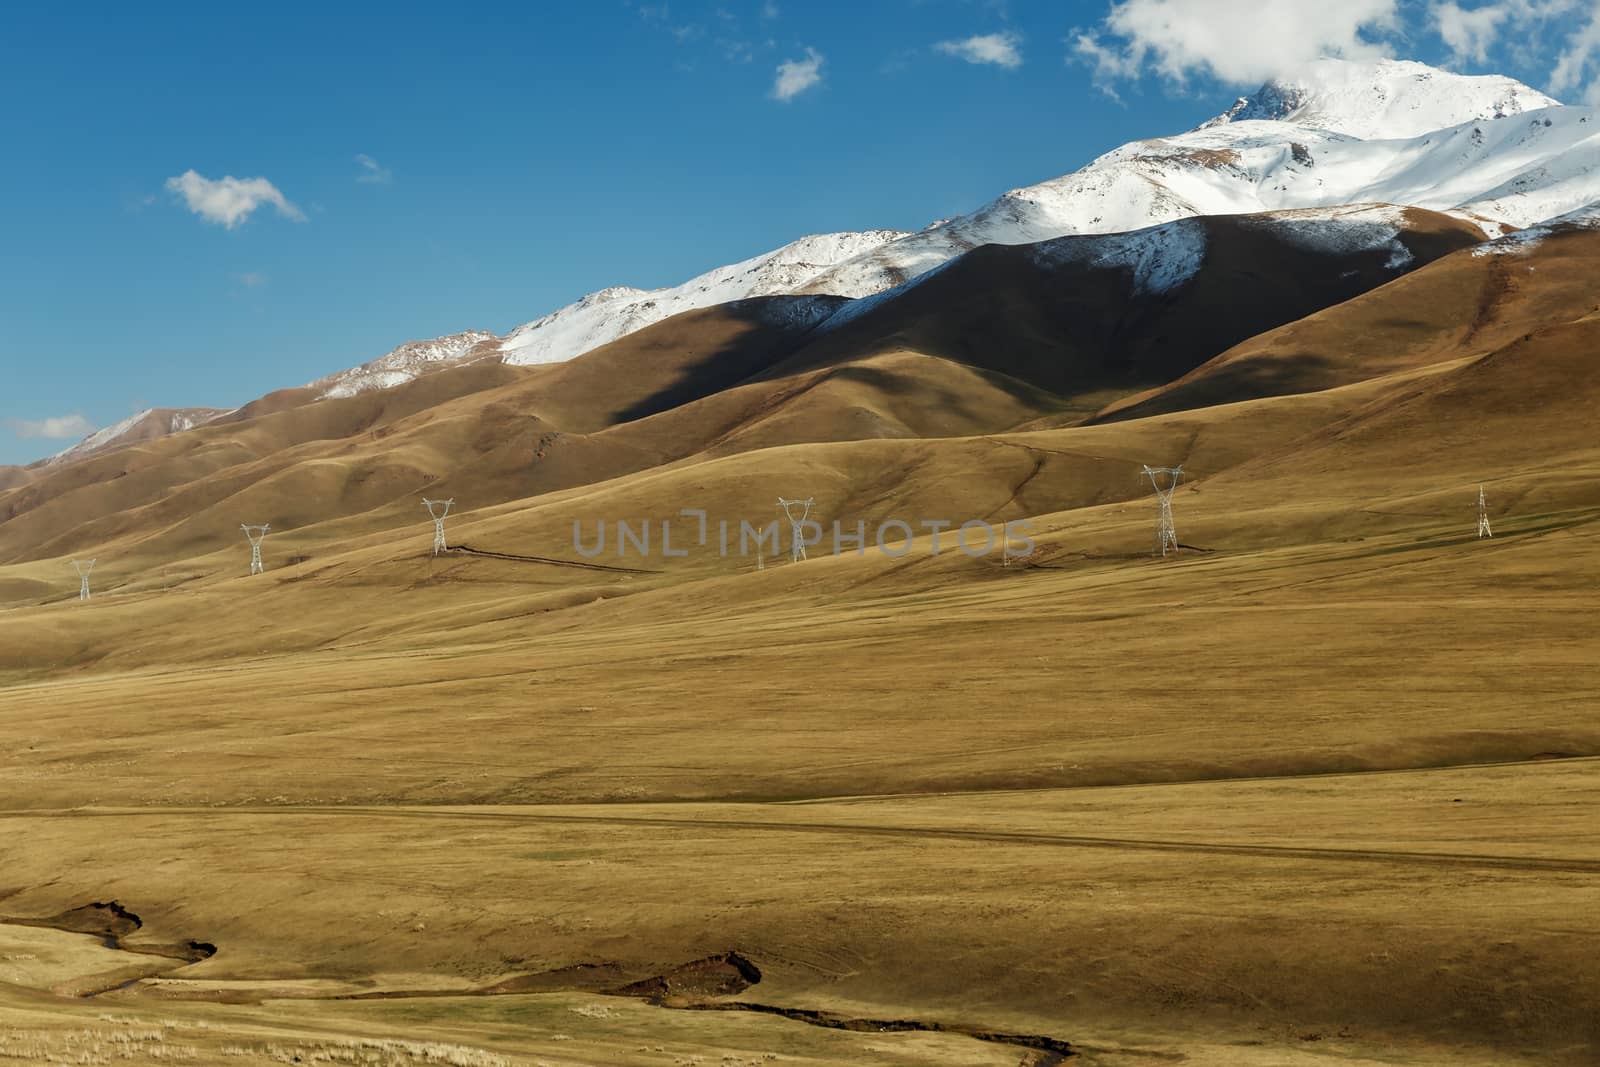 The snowy peaks of the mountains along which the power line passes in Kyrgyzstan.